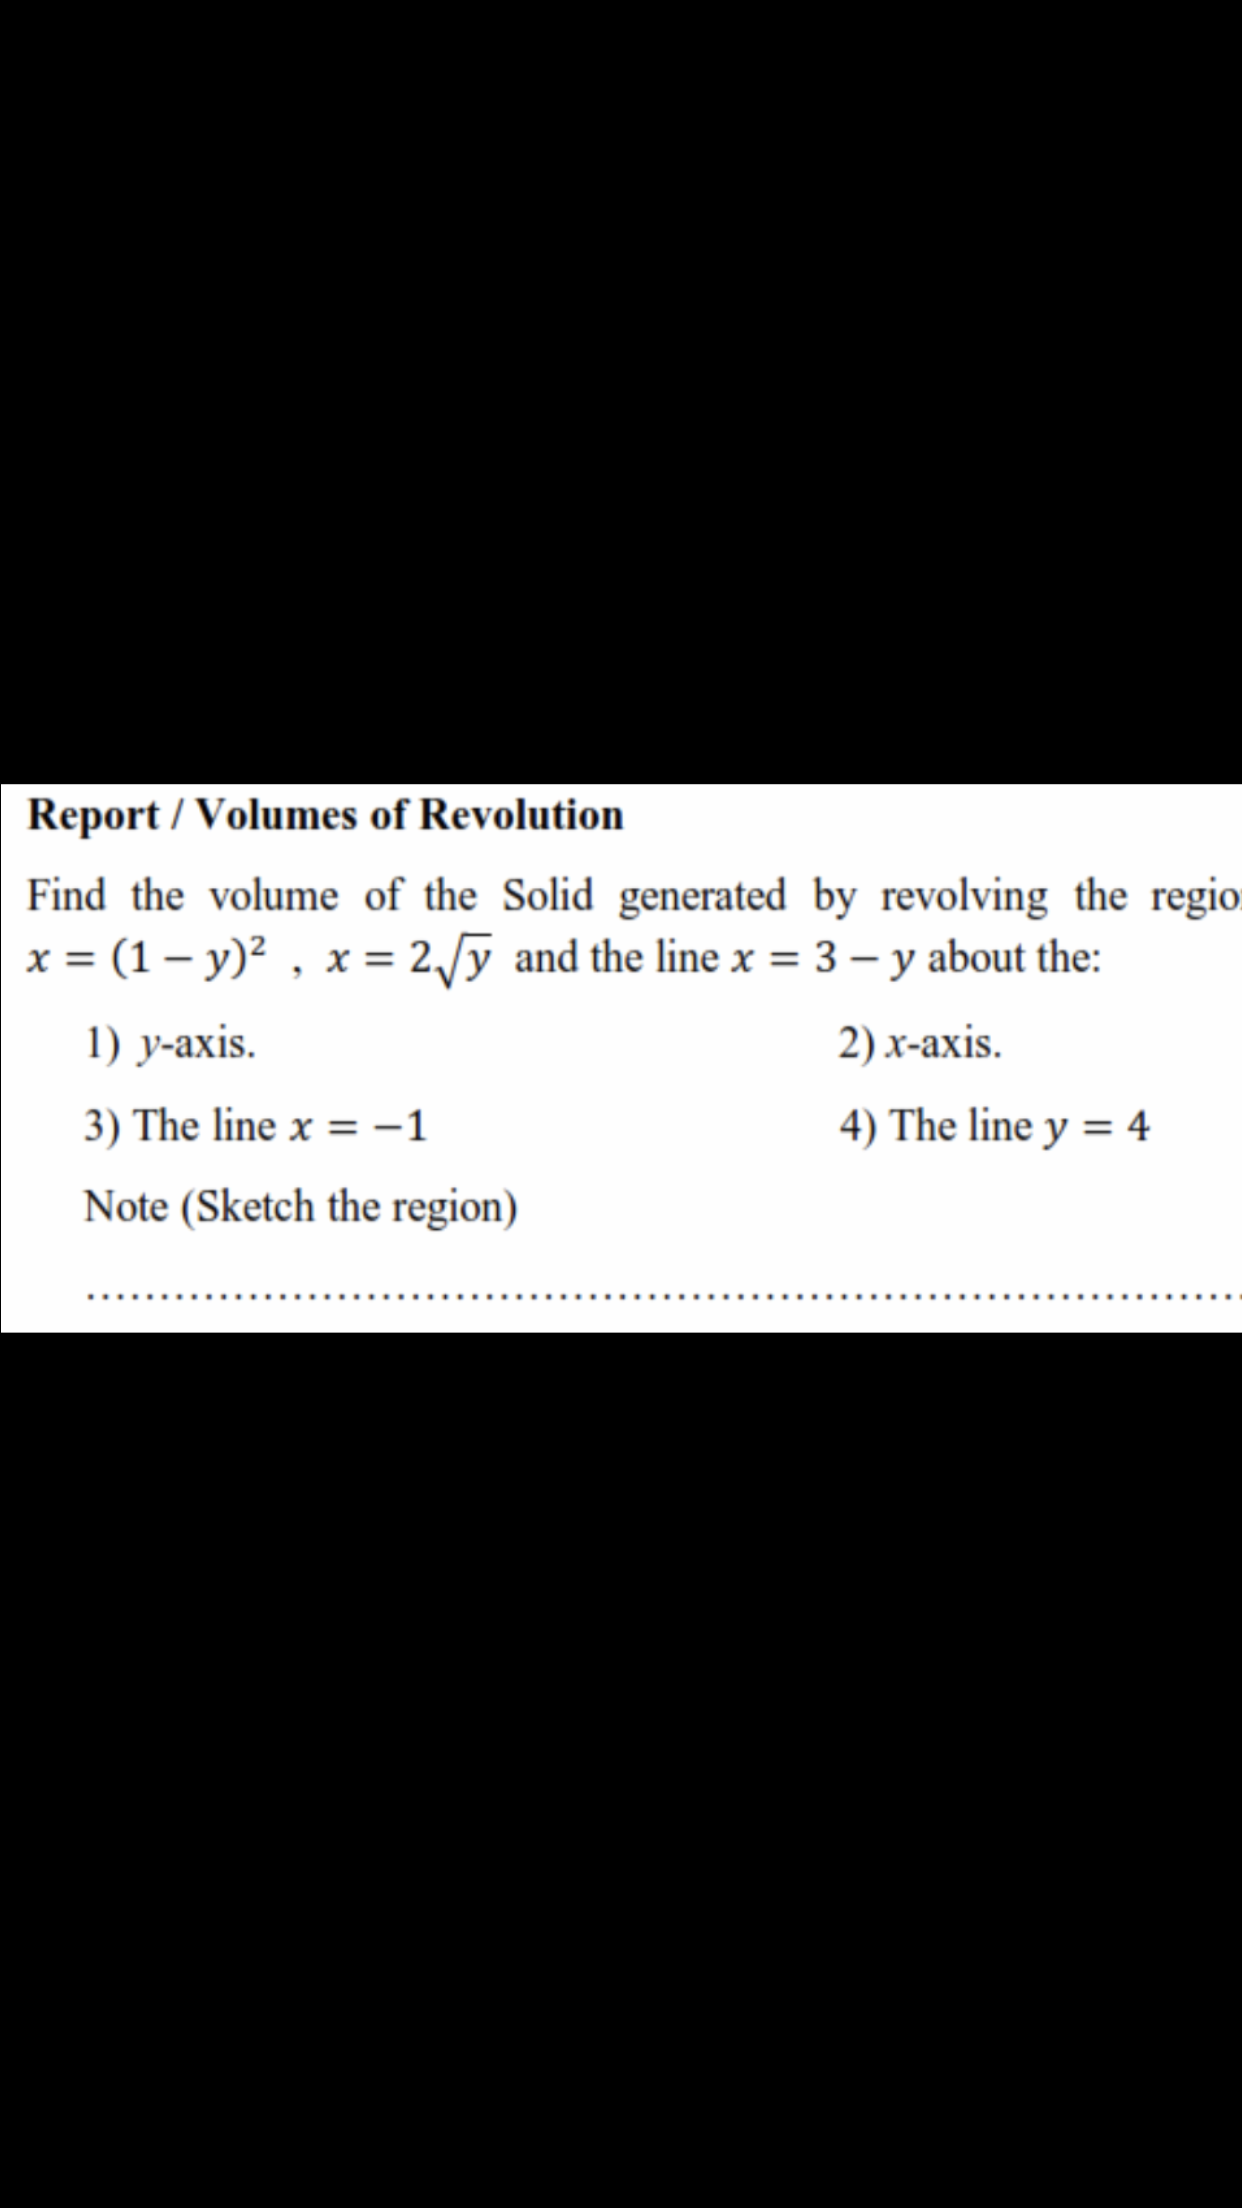 Find the volume of the Solid generated by revolving the regio
x = (1 – y)? , x = 2/y and the line x = 3 – y about the:
%3D
1) y-axis.
2) x-axis.
